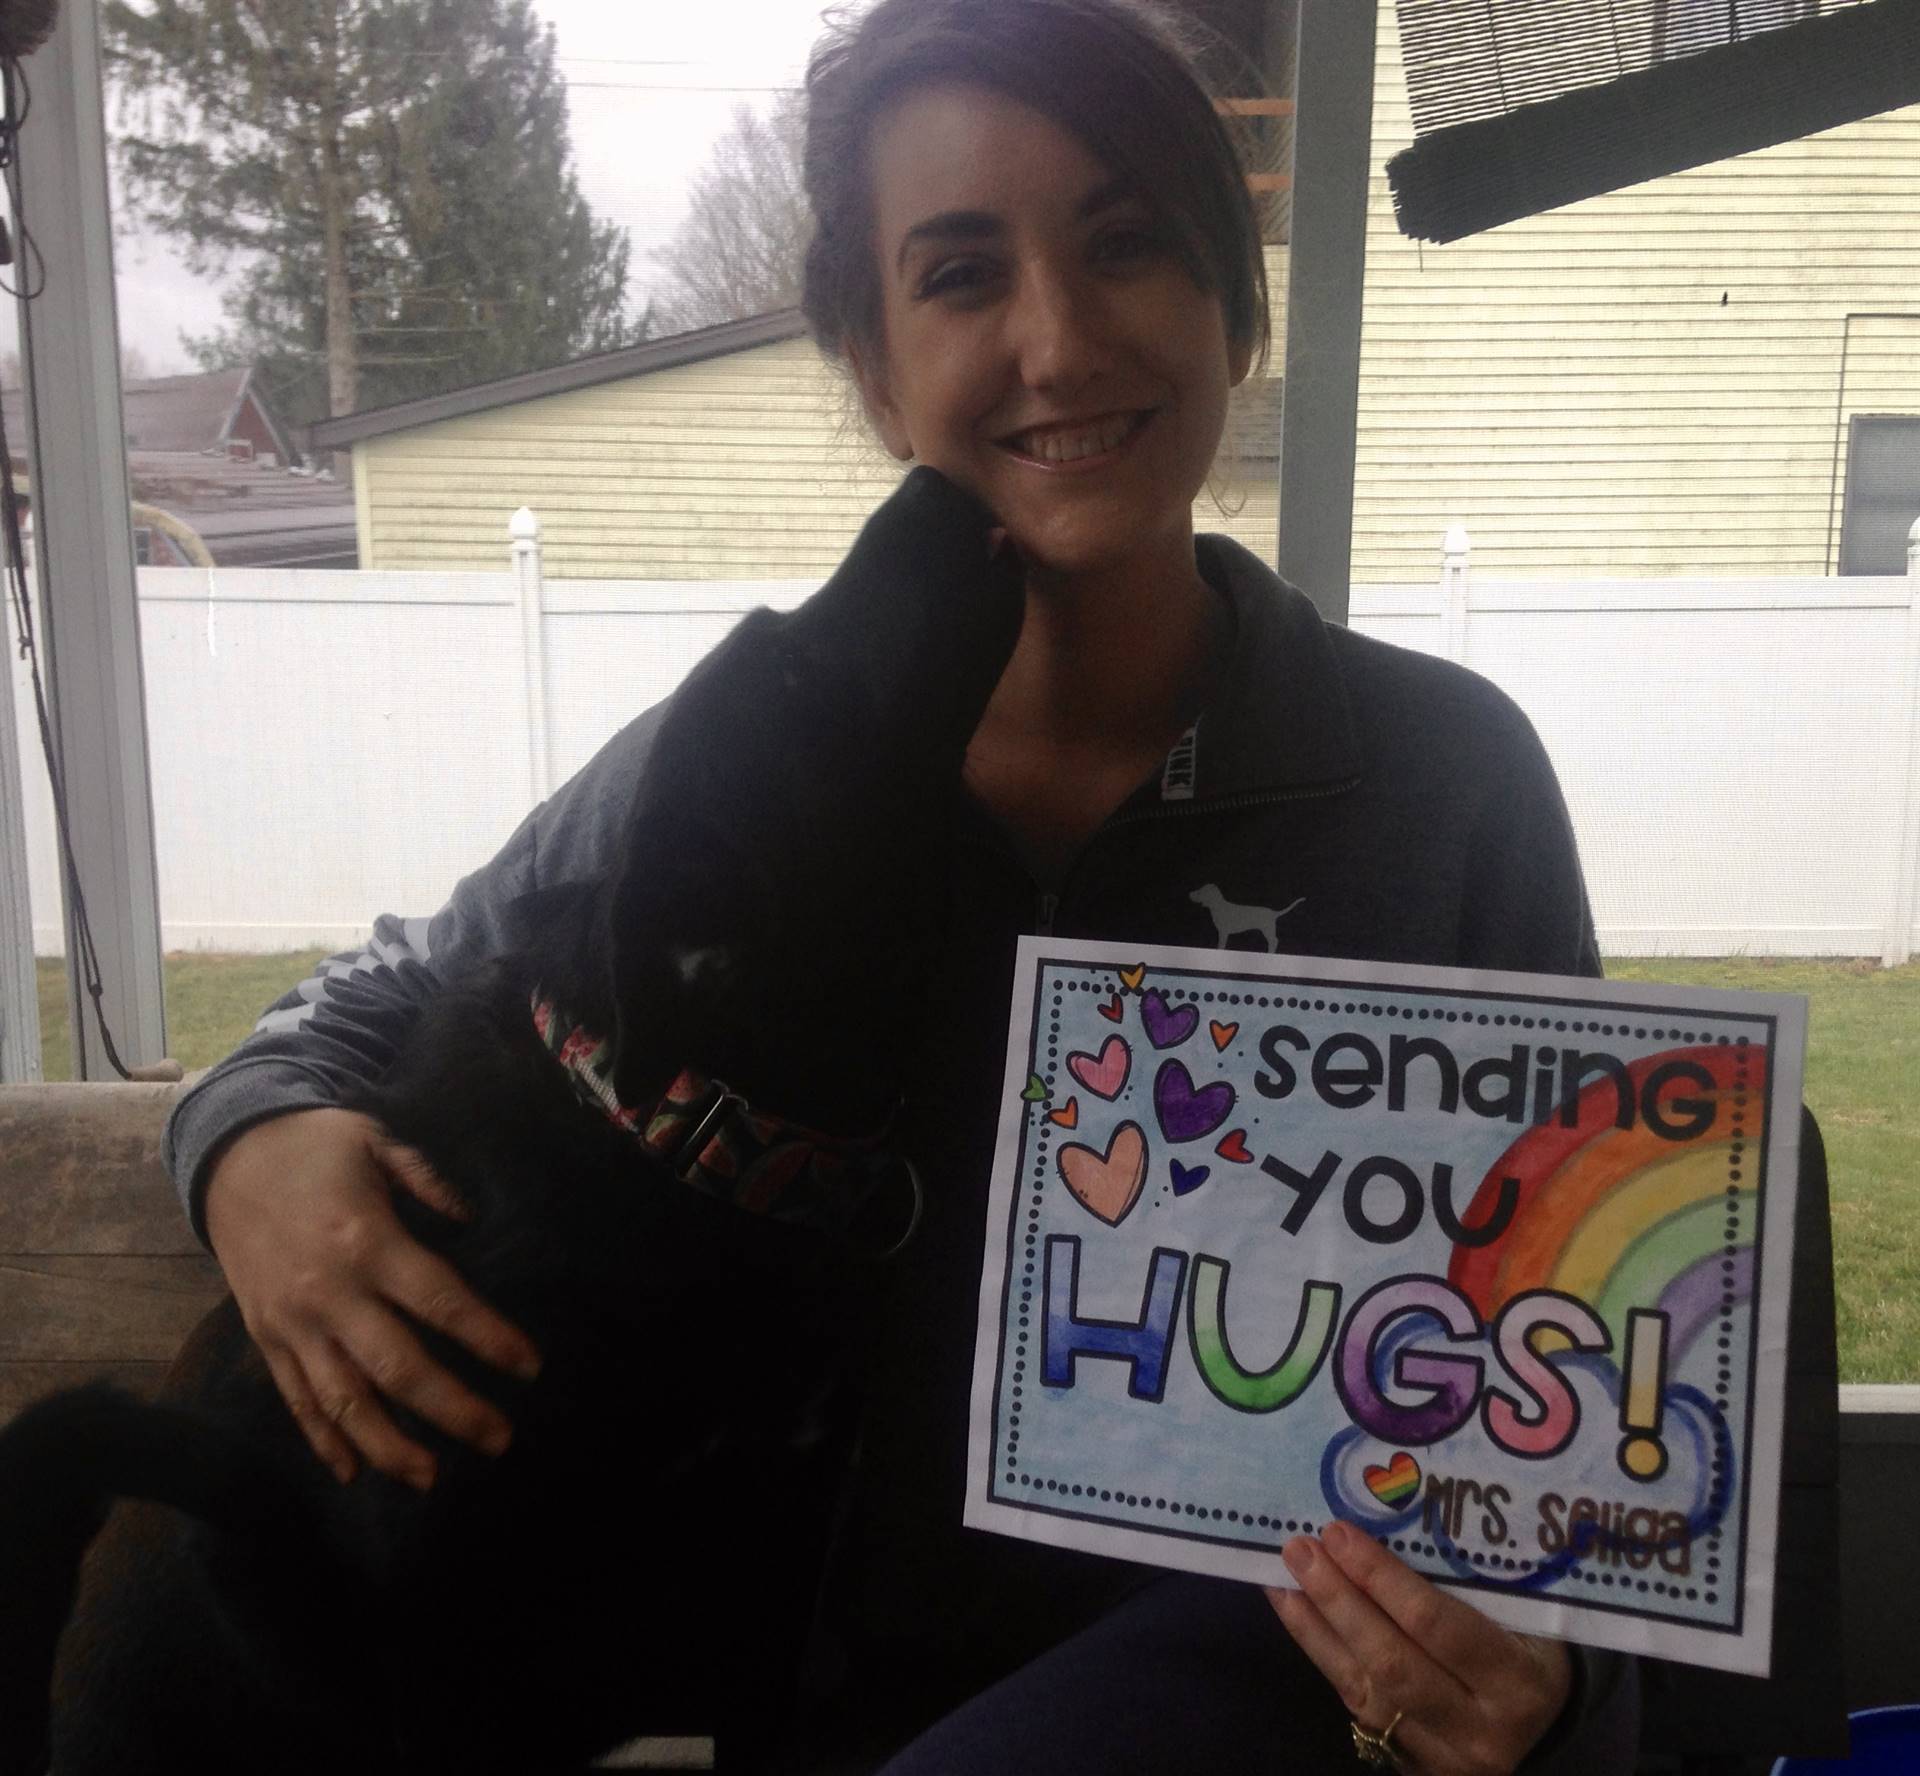 staff member with "sending you hugs" sign